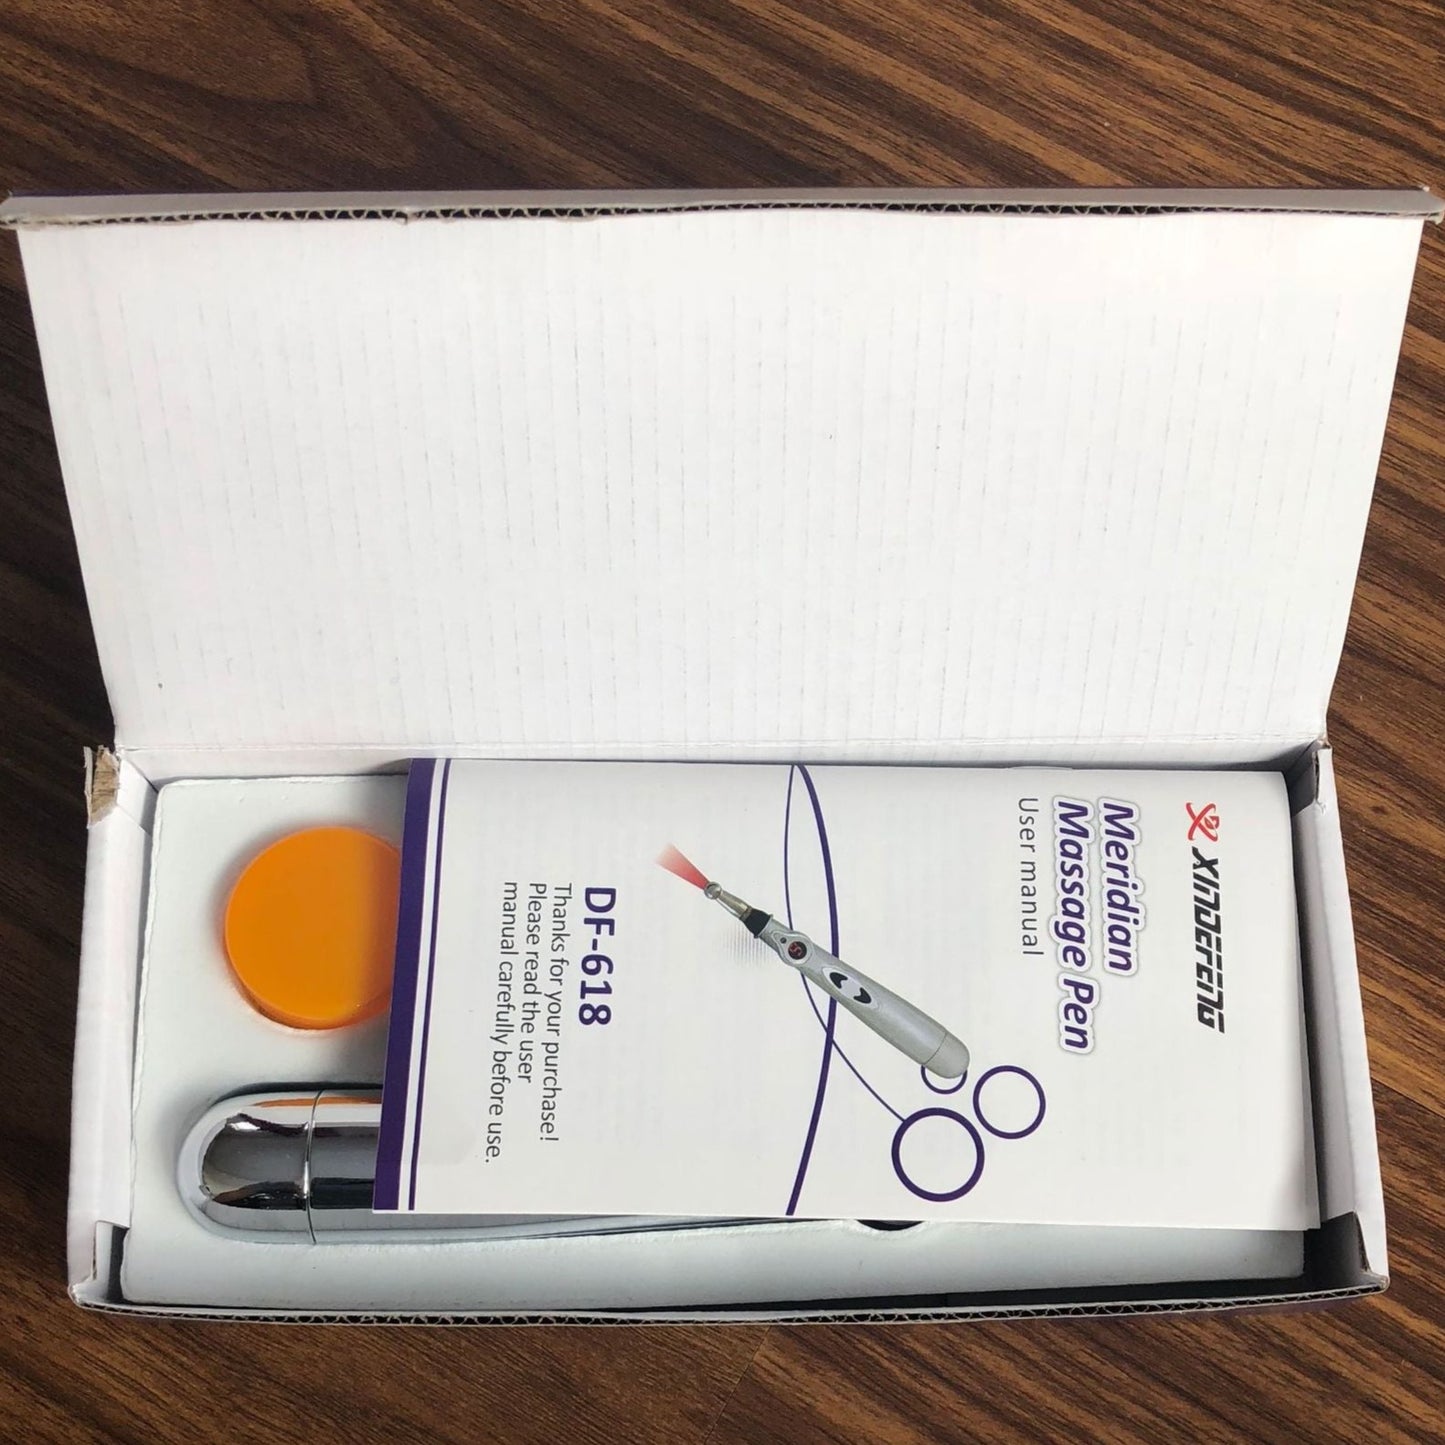 Acupuncture Massage Pen with packaging